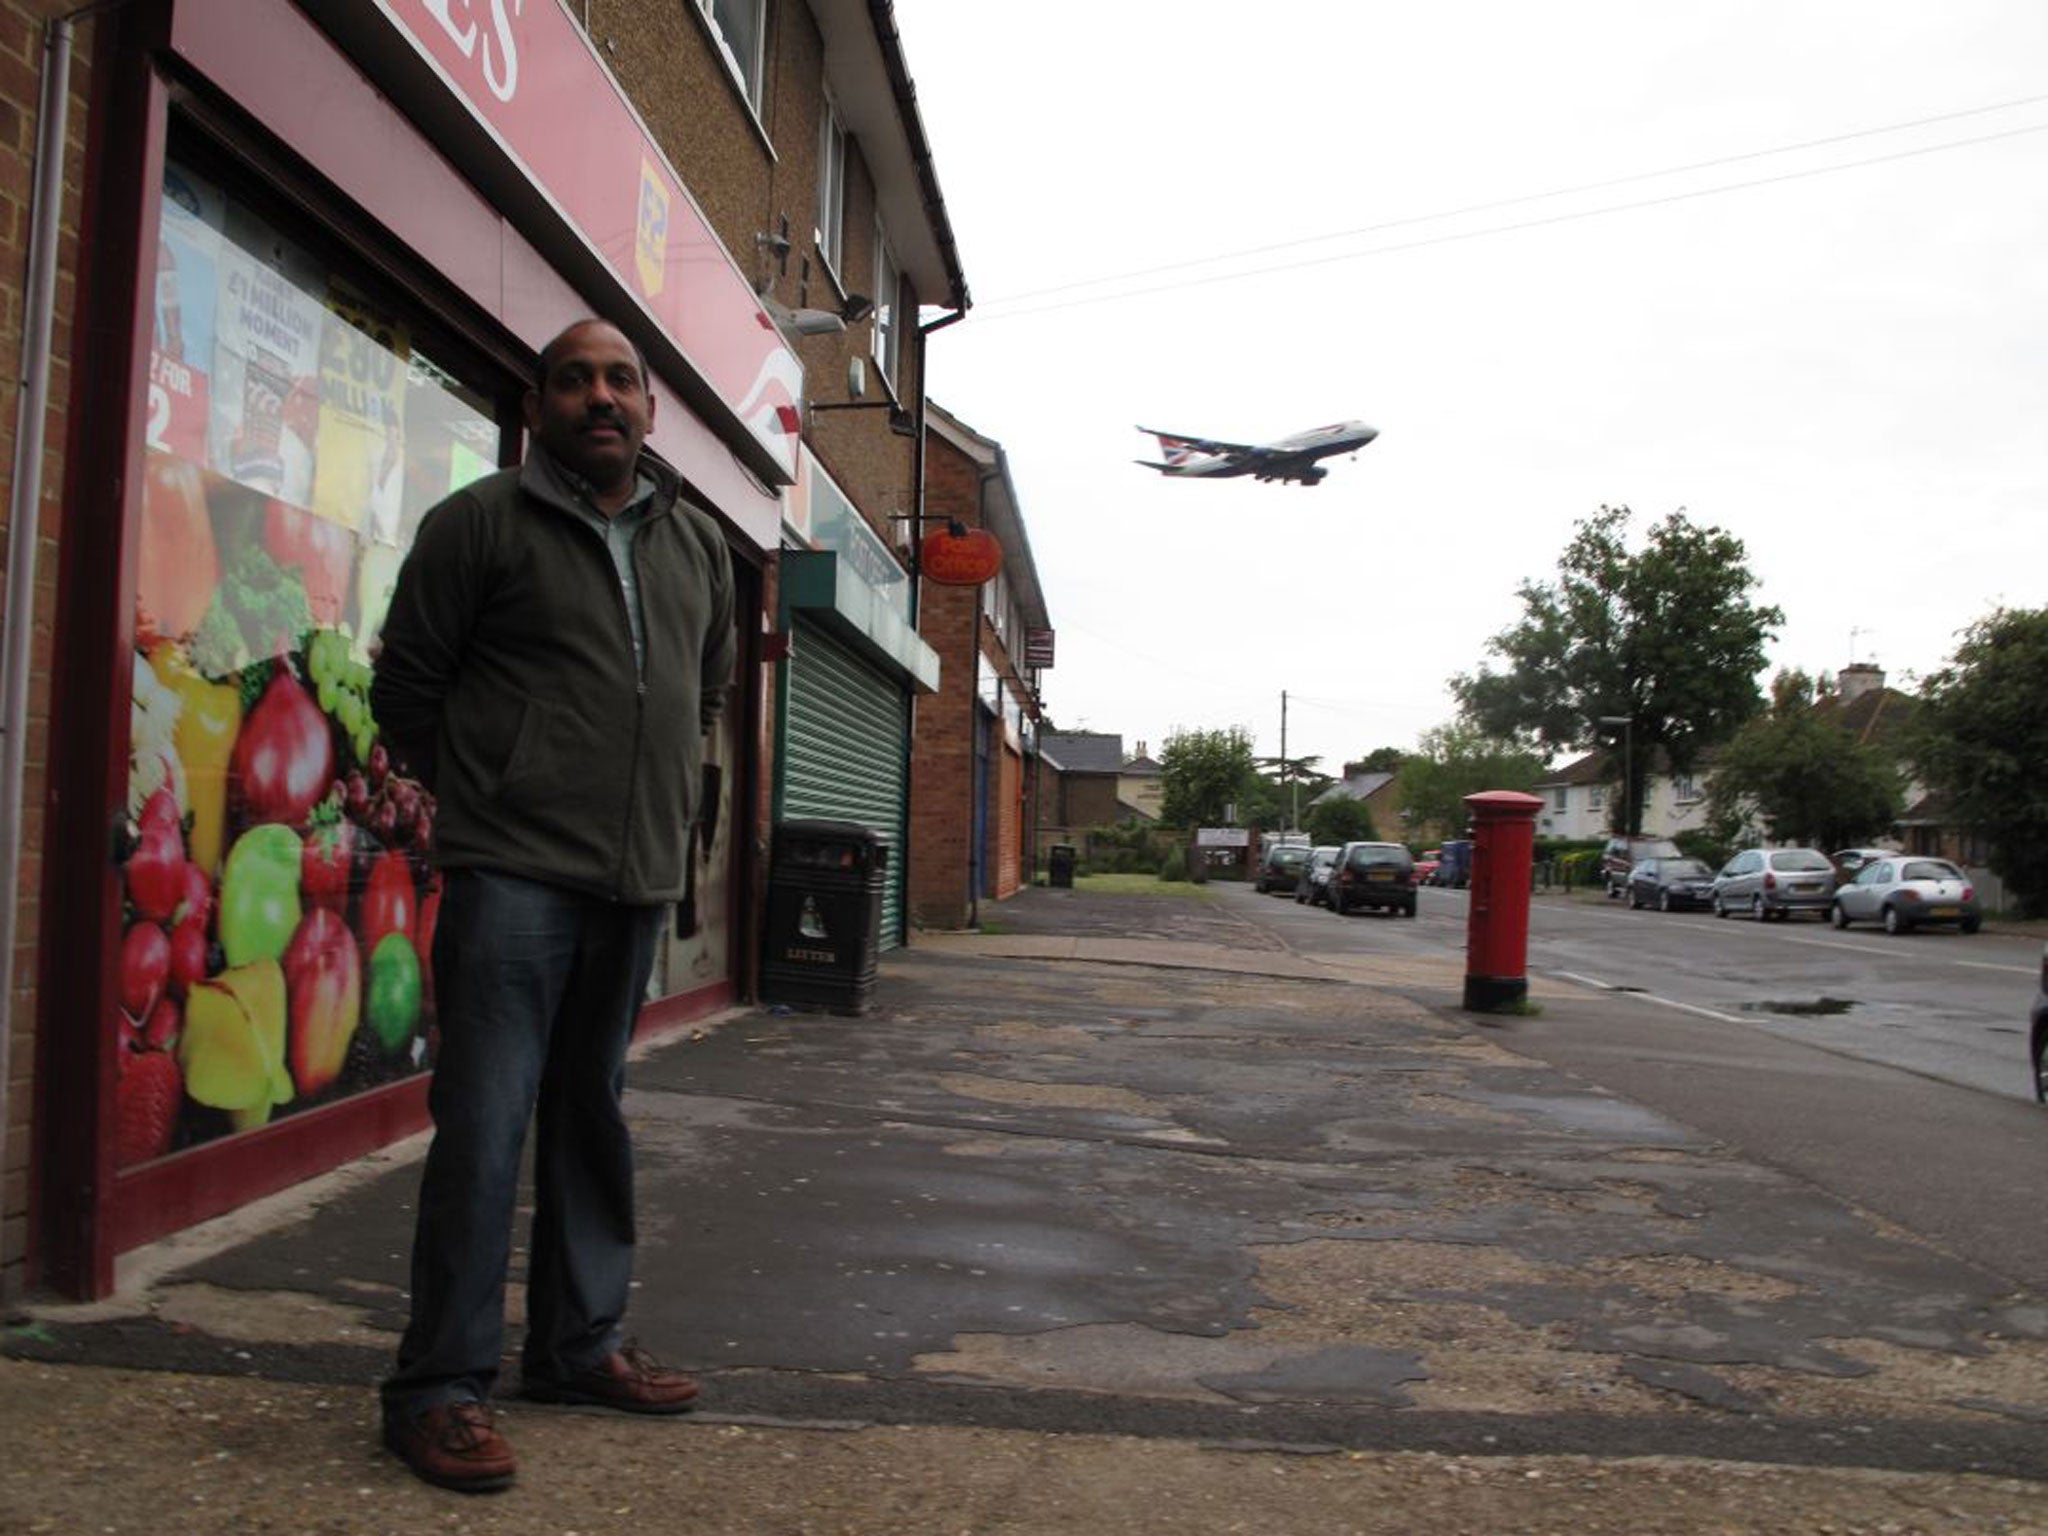 Sri Haran, who runs a shop in Stanwell Moor, believes there is nothing residents or business people will be able to do to stop the plans